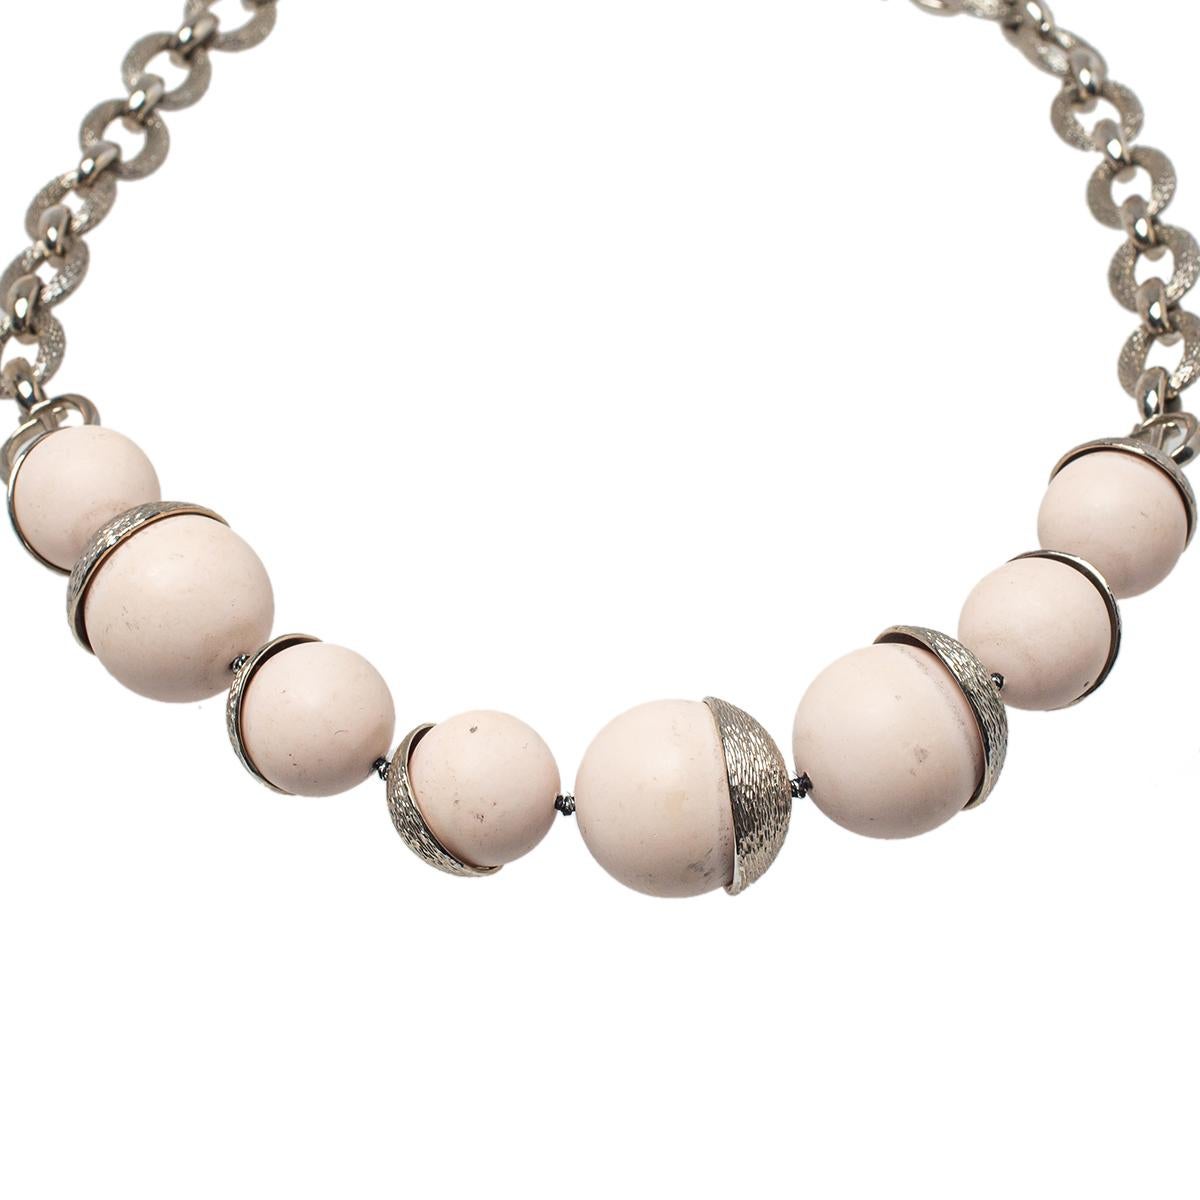 This necklace is just the accessory for a fashionable soul like yourself! From their Mise en Dior collection, this Dior necklace is designed to be flaunted. It is crafted from silver-tone metal and carries a strand of beads. This piece will make a